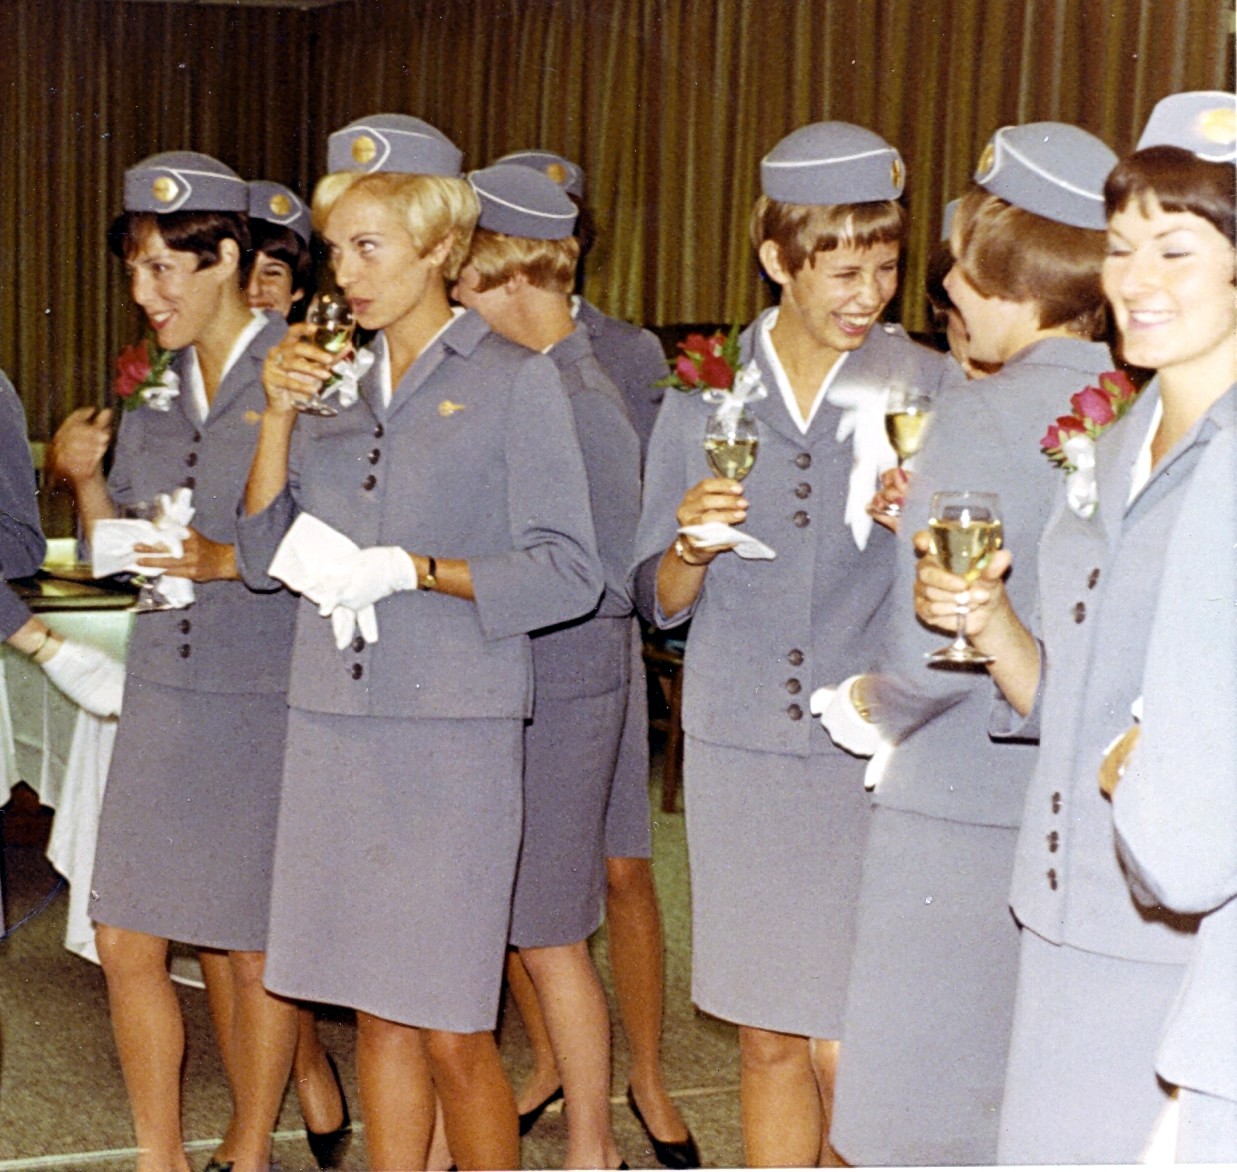 1968 May Flight Service Class 13 enjoy a Graduation toast at the Flight Service Academy in Miami, Florida.  The Graduation toast was the only time Pan Am flight attendants were allowed to drink alcohol in uniform.